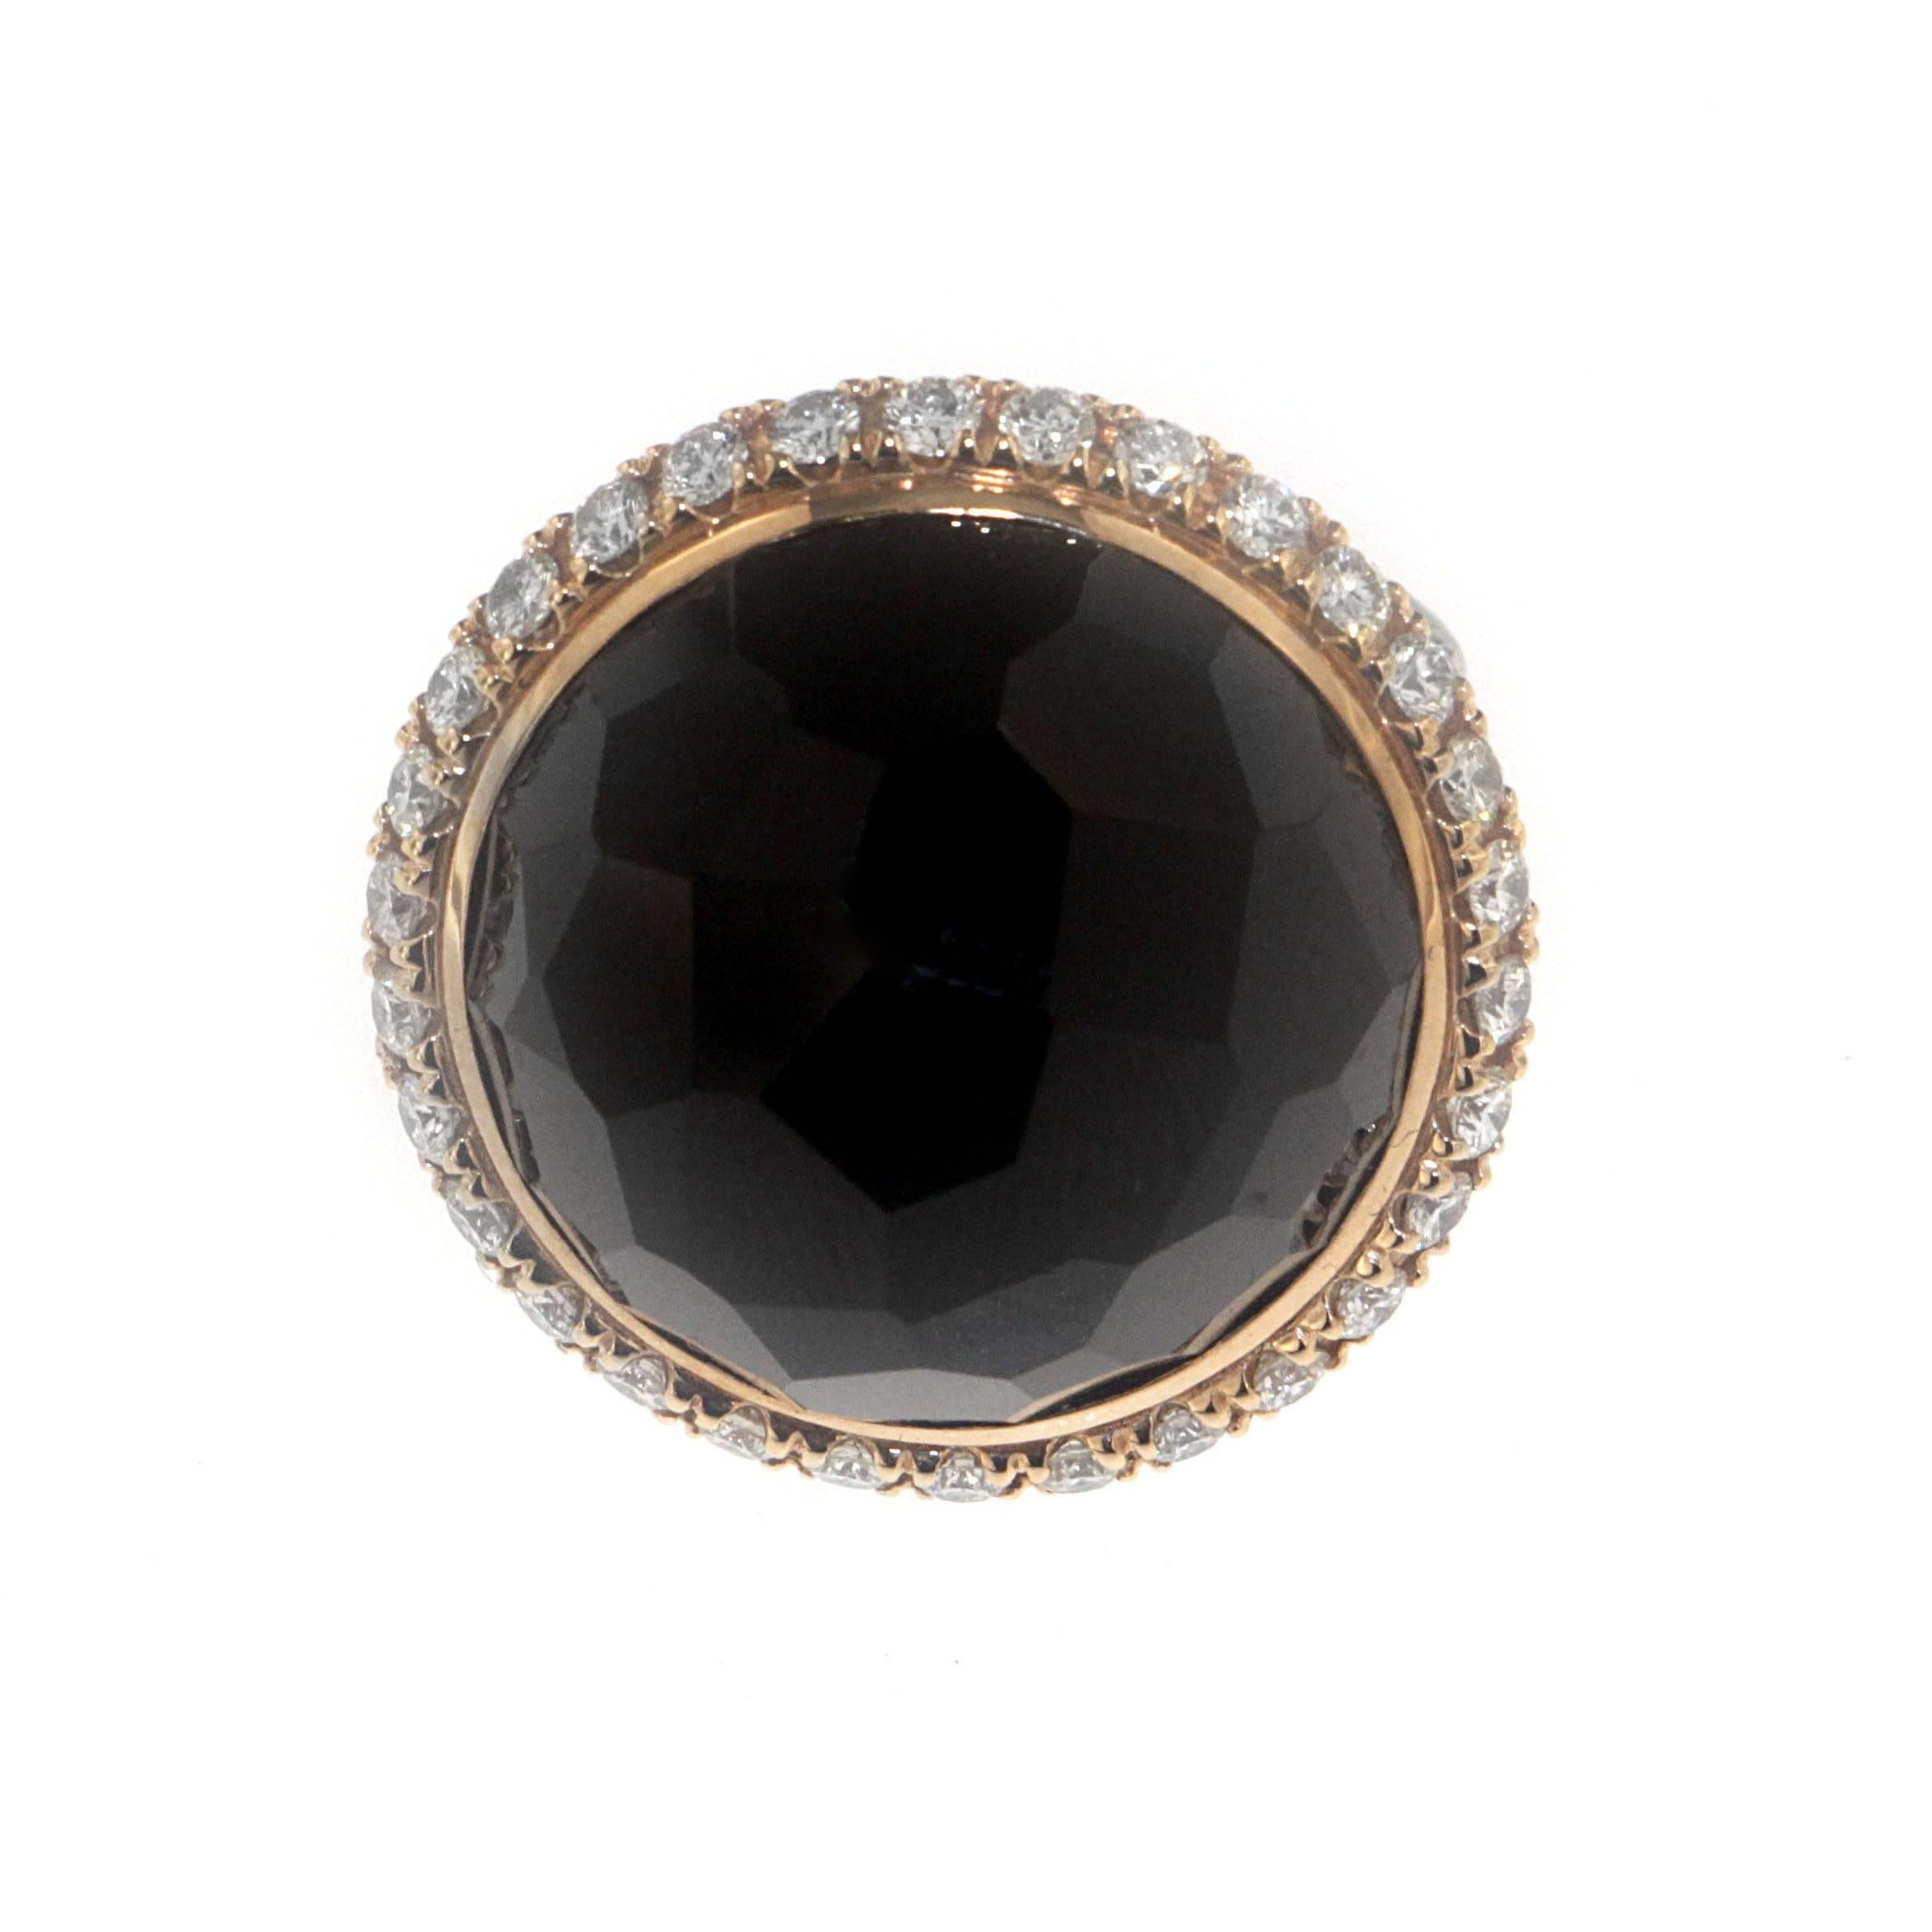 Zorab captures simplicity, elegance, and style with his Multi-Faceted 43.57 Carat Black Spinel dome shaped cocktail ring. The epic bombe center stone's richness is amplified by 1.22 carats of white diamonds circling the rim and extended to each side